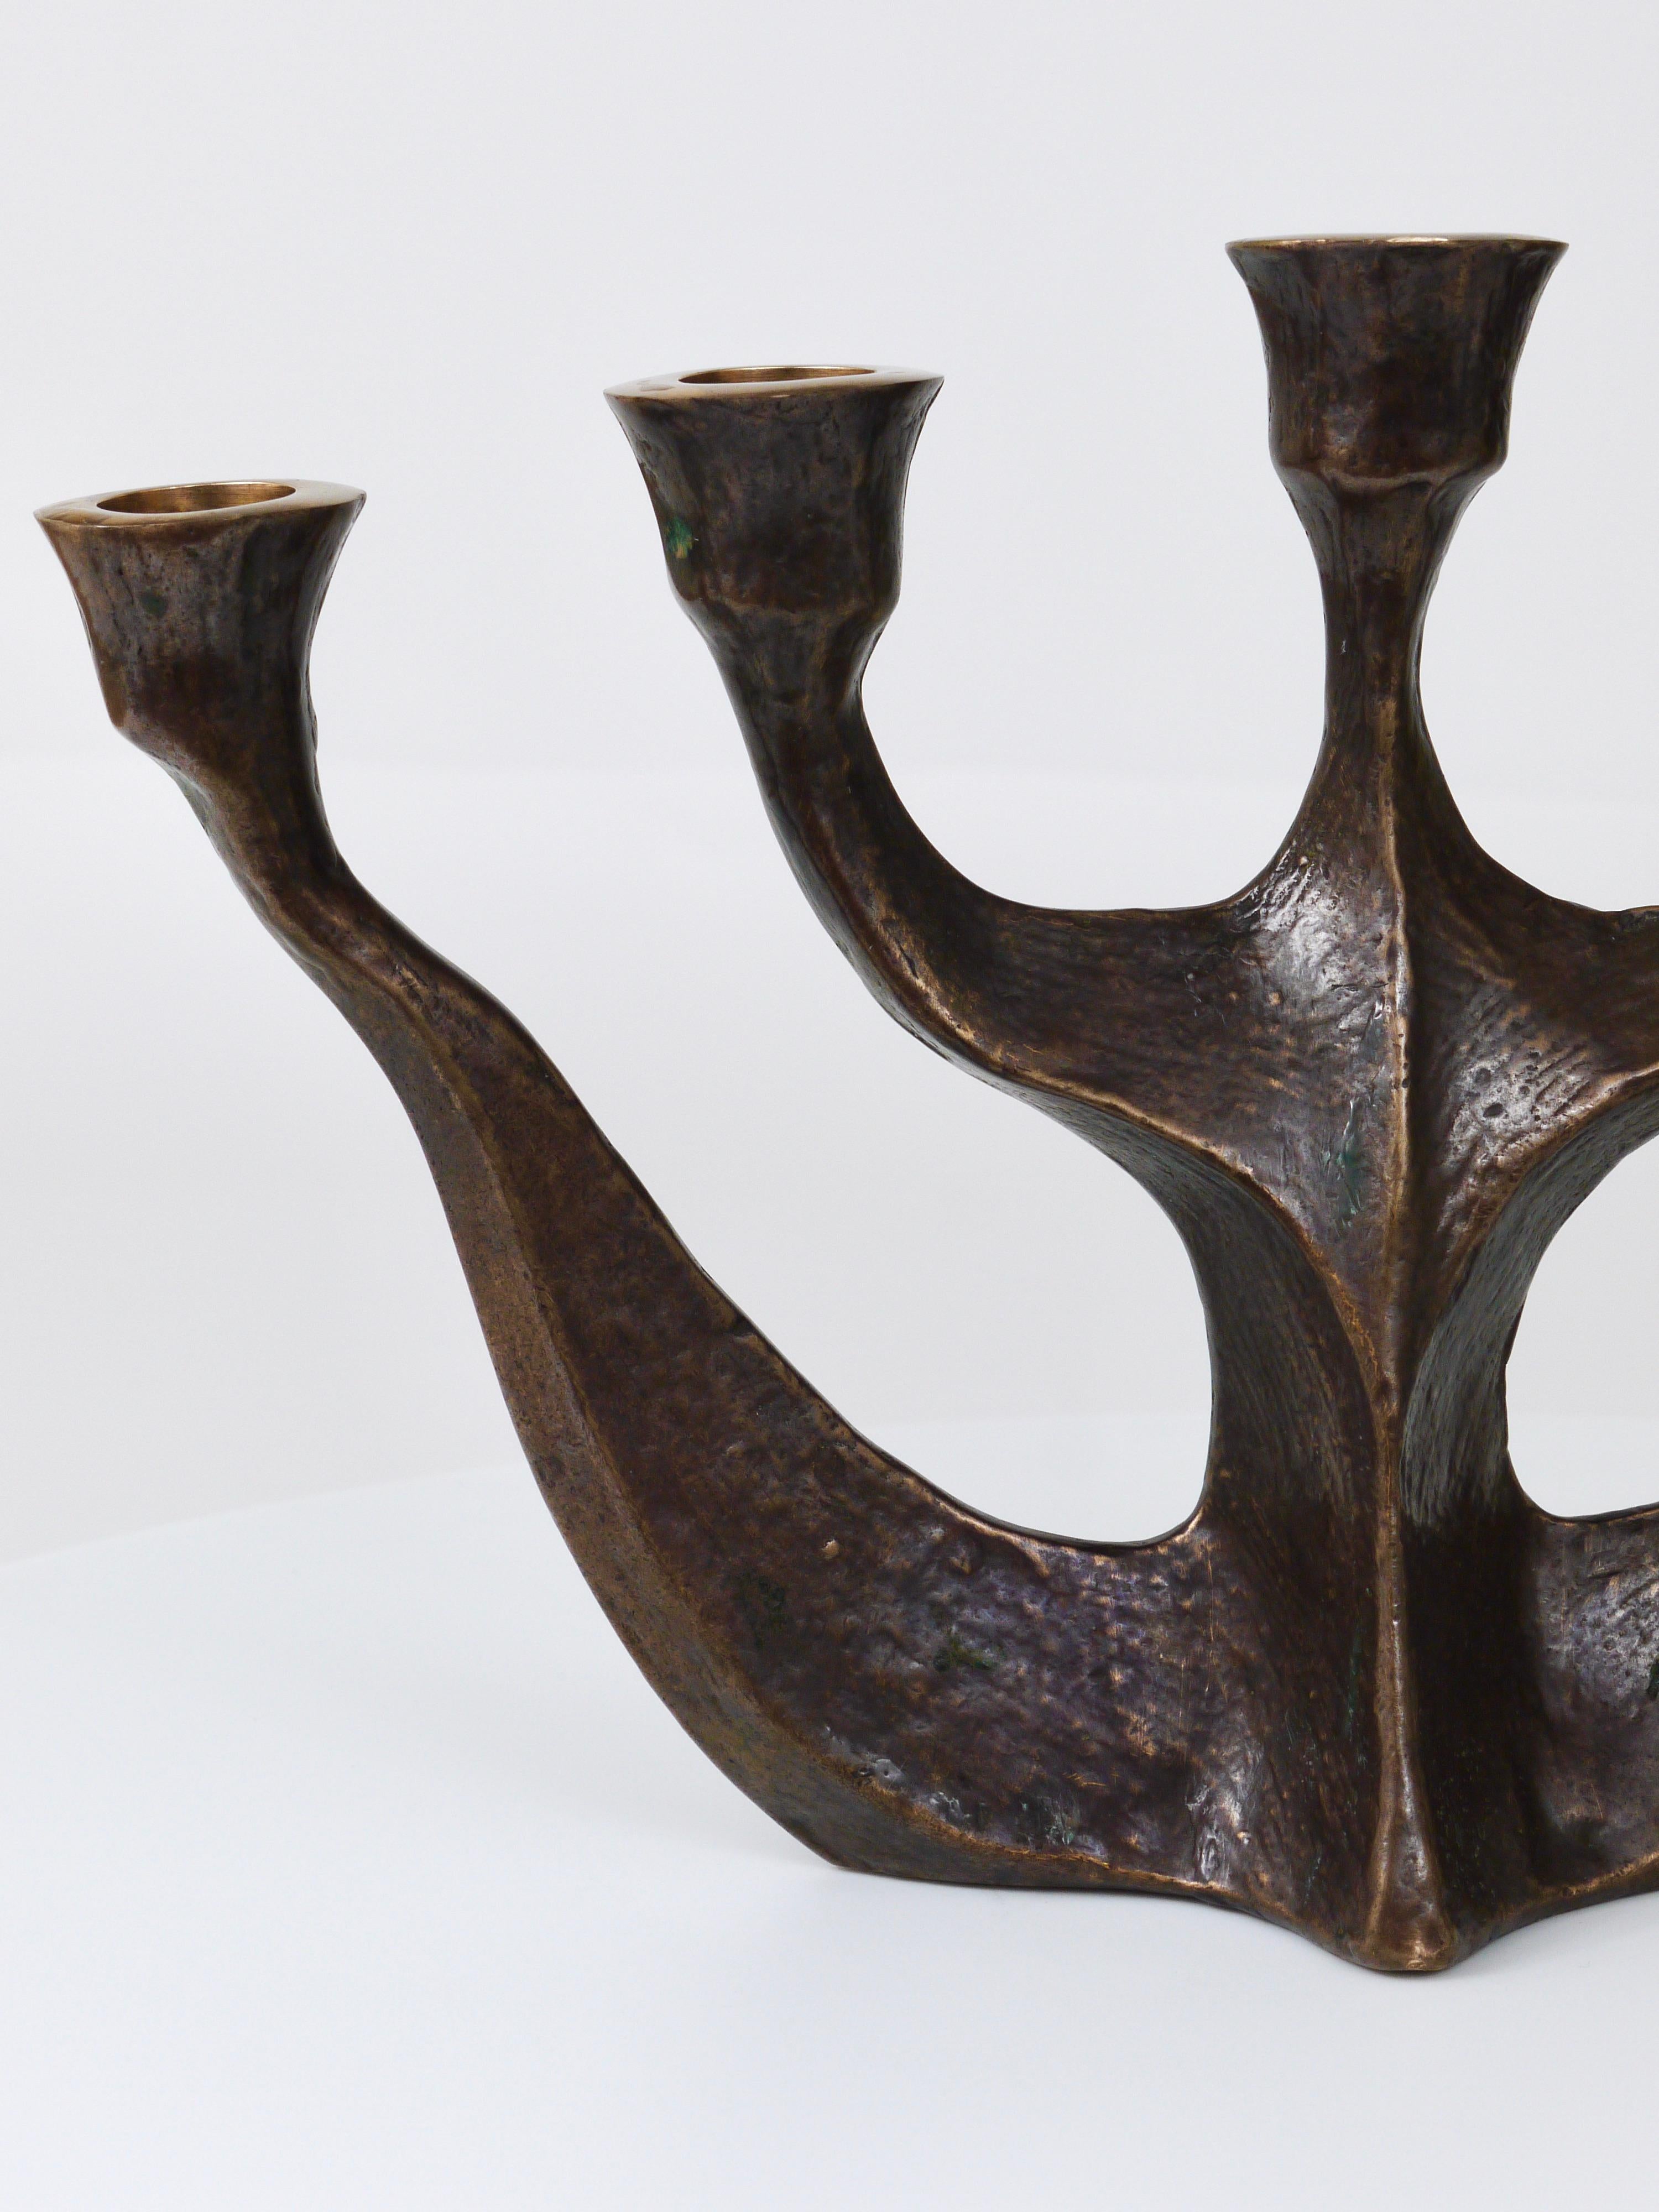 Up to Two Midcentury Brutalist Bronze Candleholders by Michael Harjes, 1960s For Sale 13